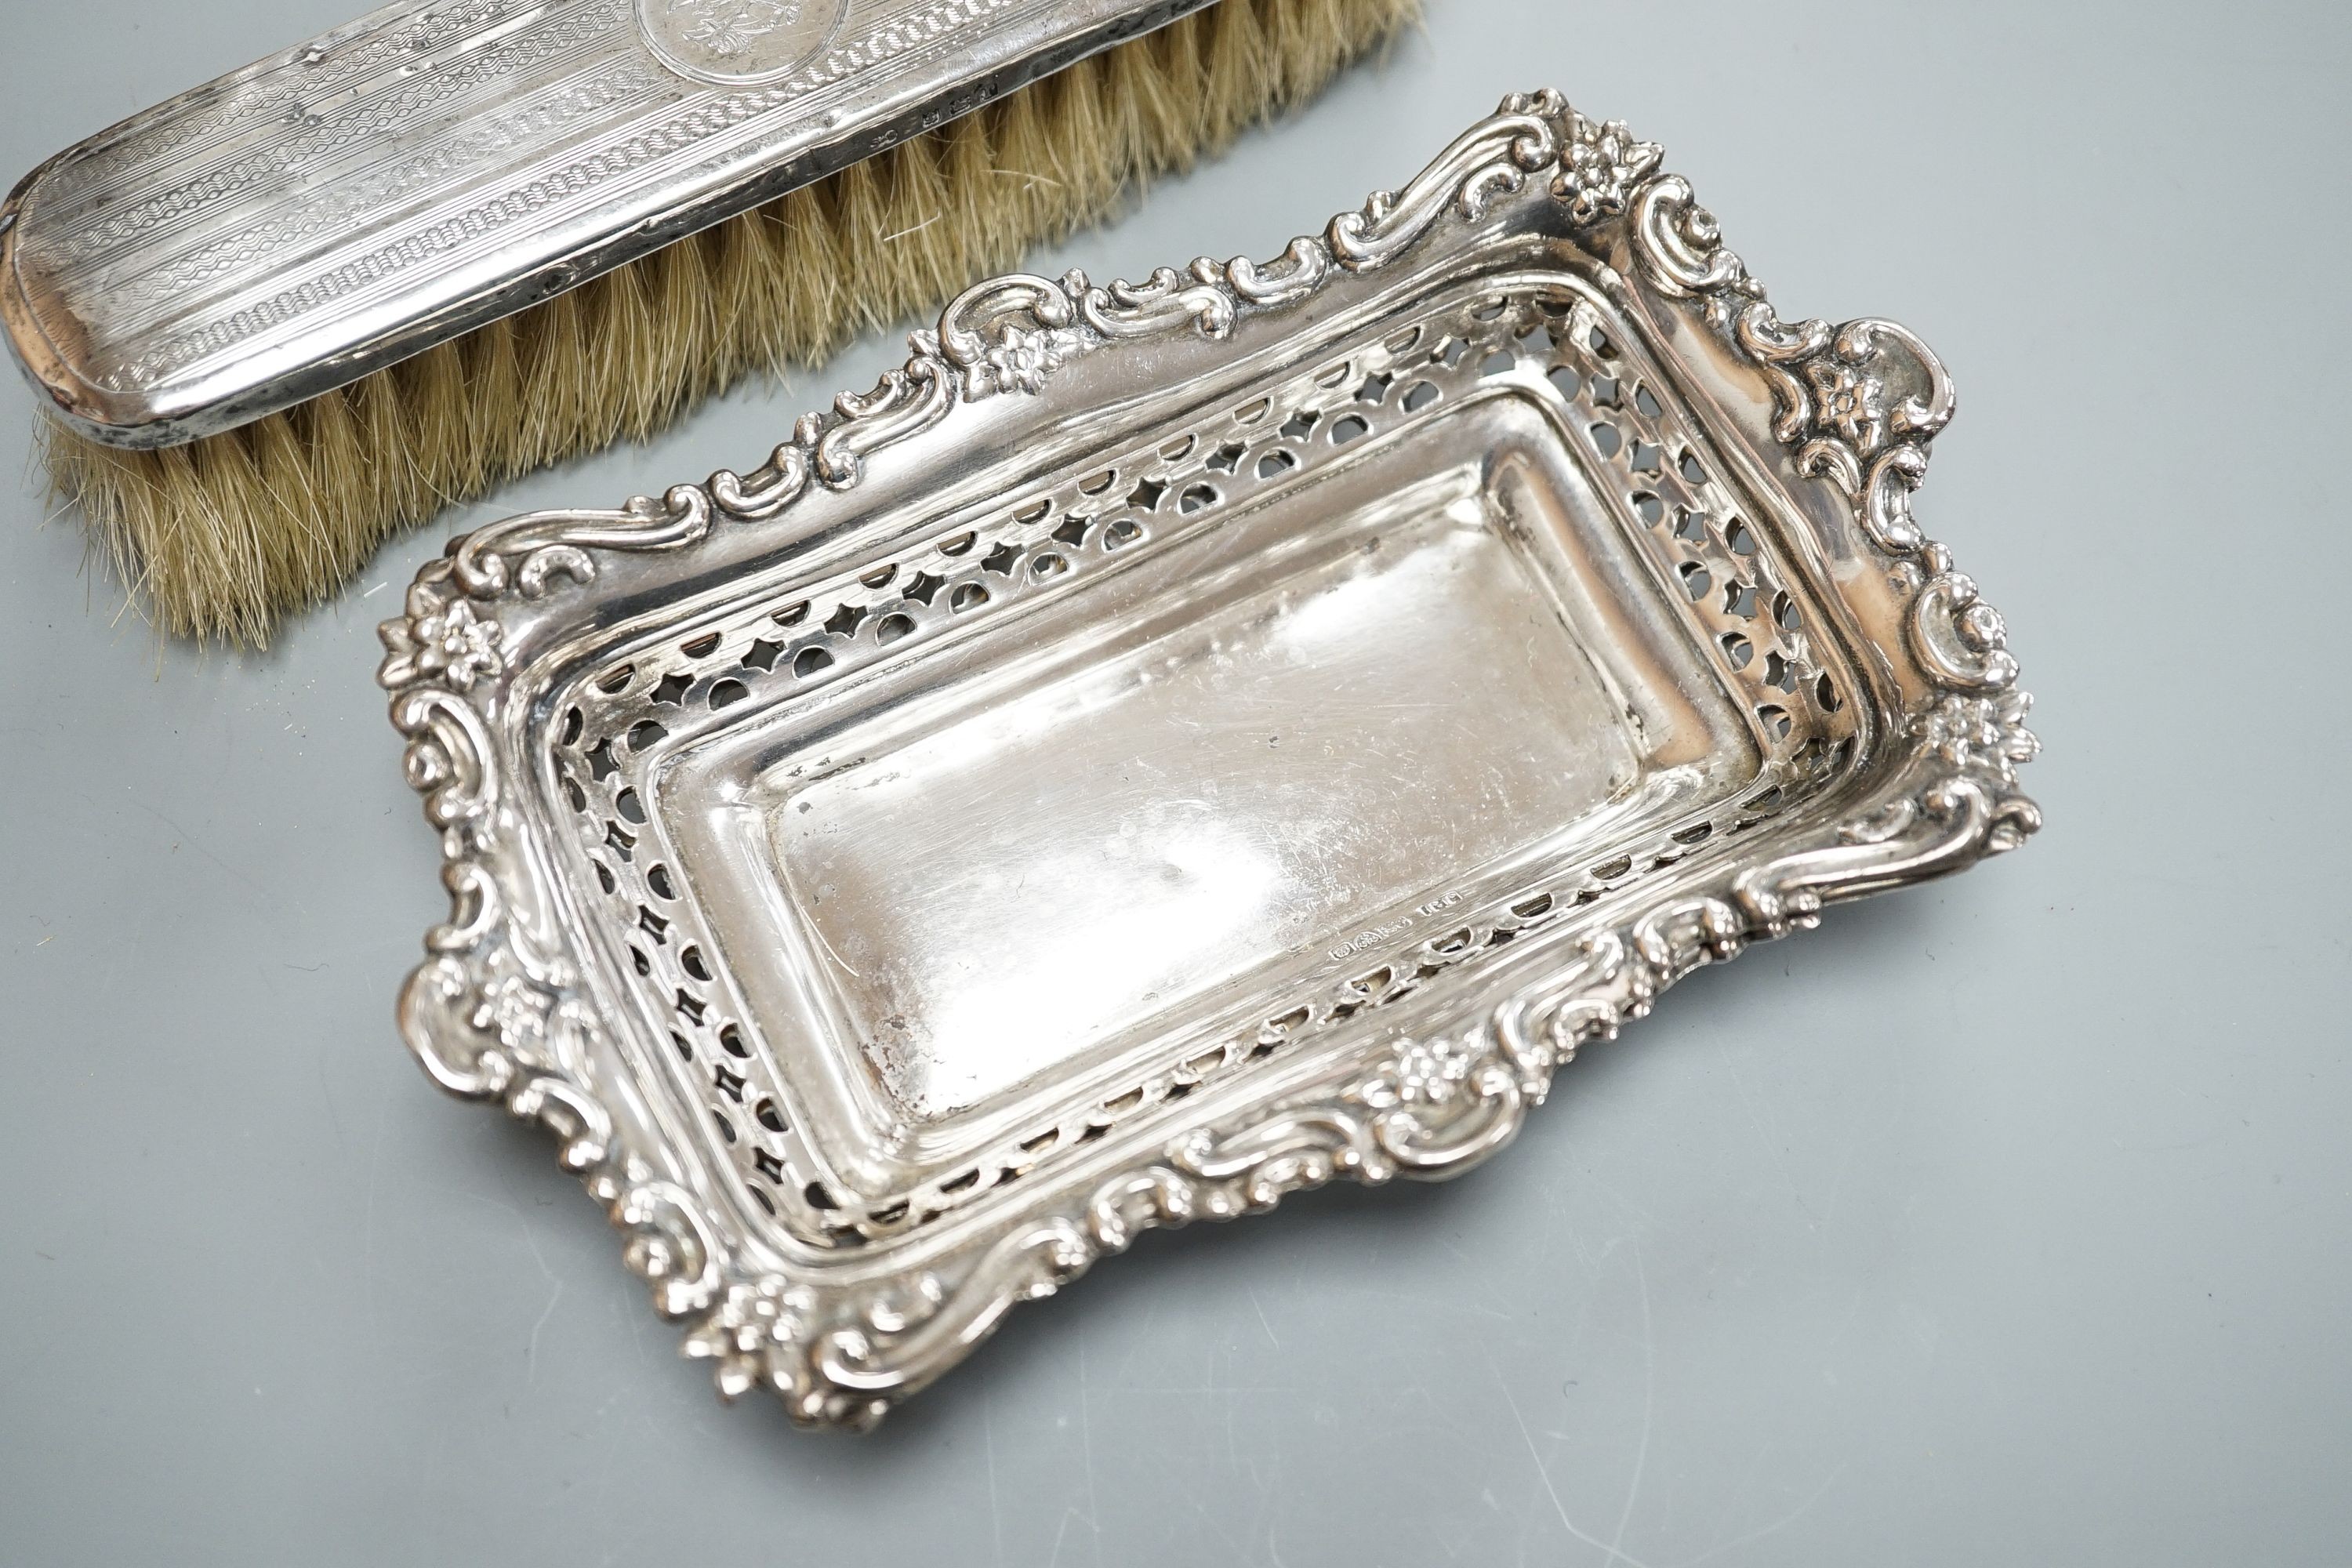 A pair of Edwardian pierced silver bonbon dishes, Chester, 1902, 16.1cm, 4.5oz, a silver and - Image 3 of 4